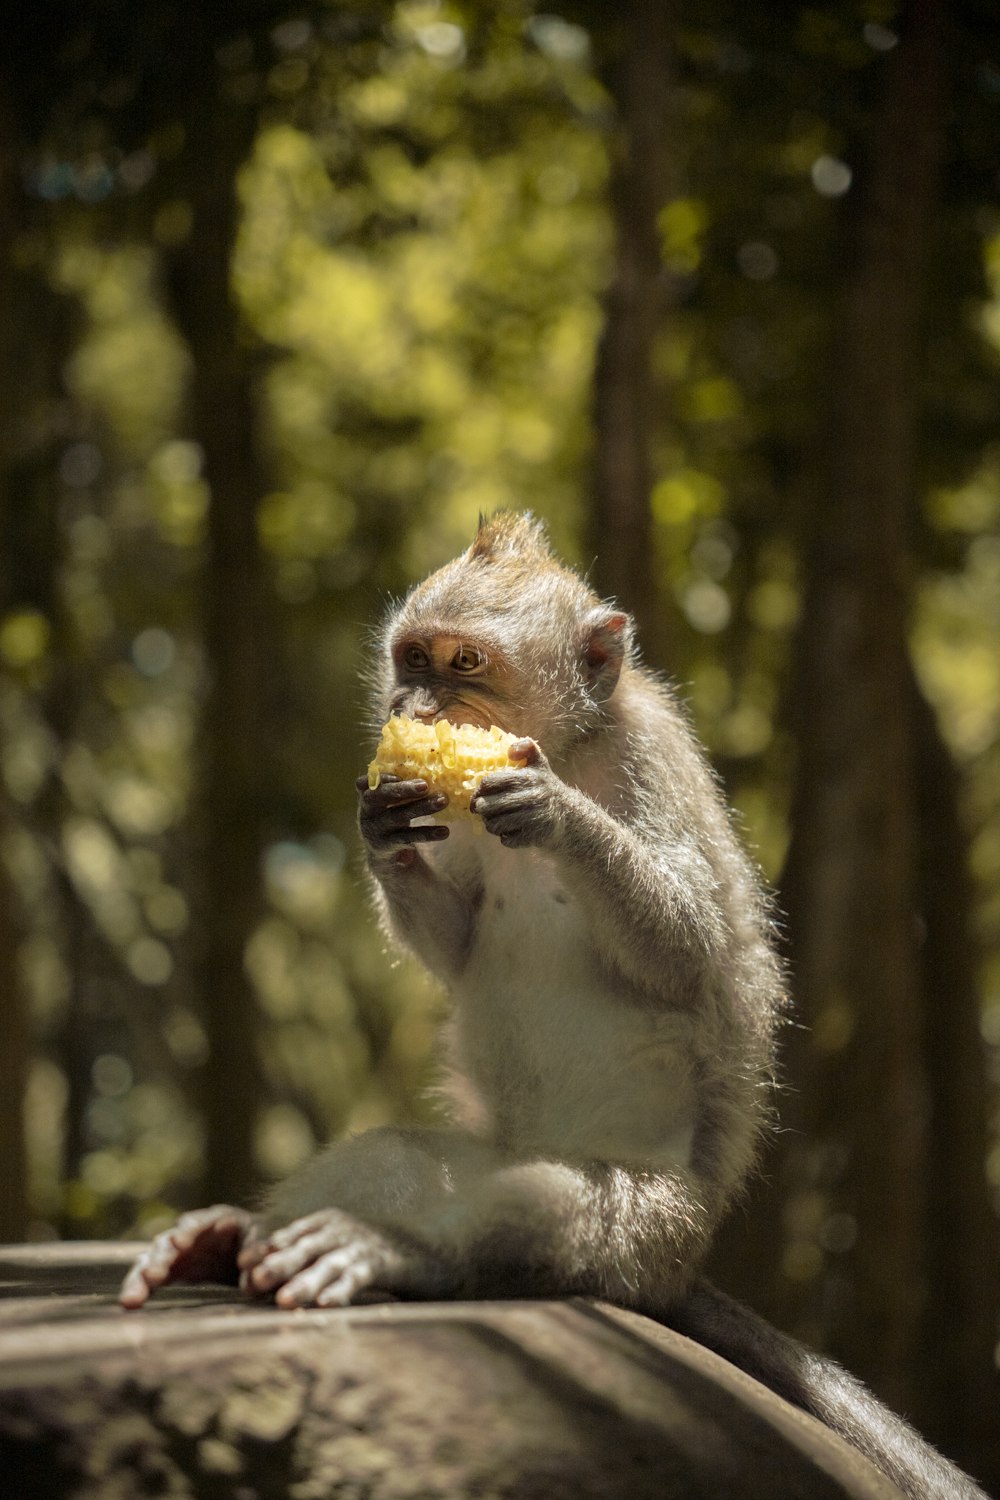 a small monkey eating a piece of food